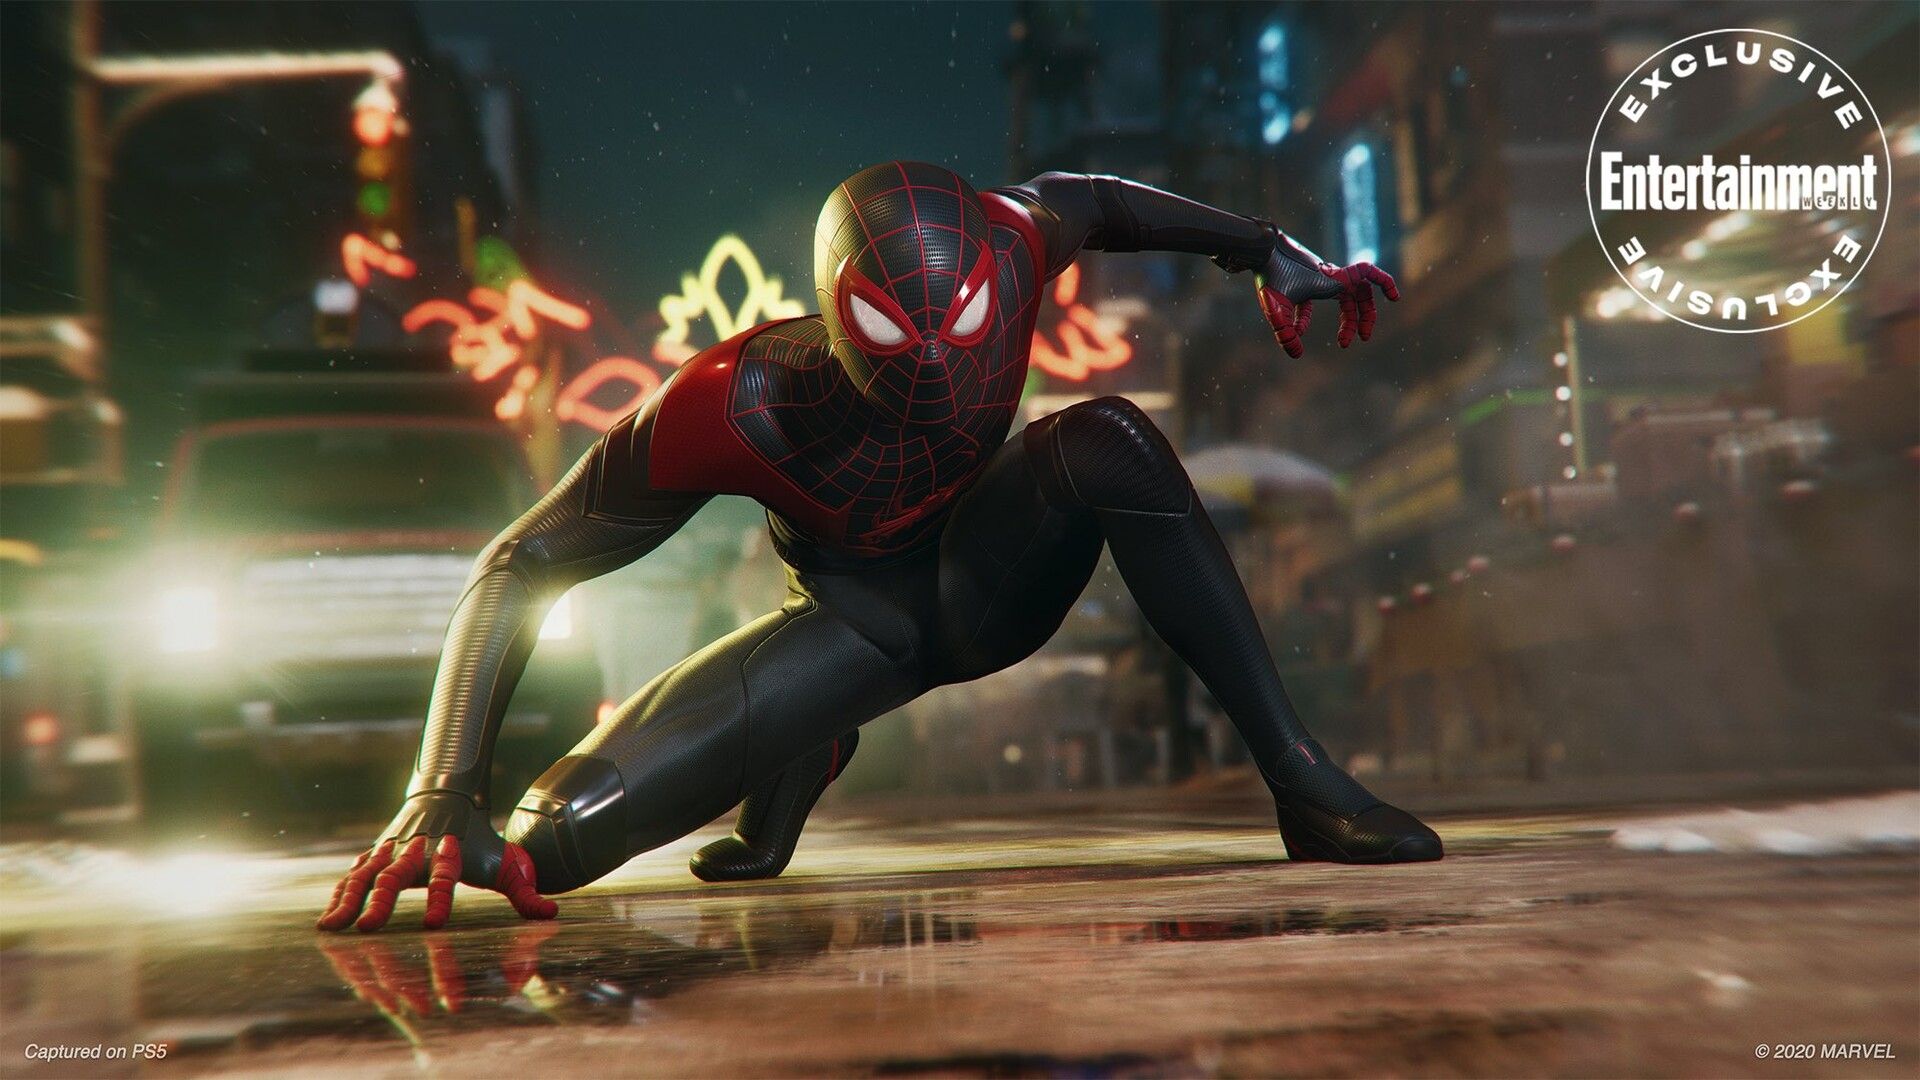 PS5's Spider Man: Miles Morales Image Vs PS4's Spider Man Screenshots Comparison Shows How Far The PlayStation Has Come.net News